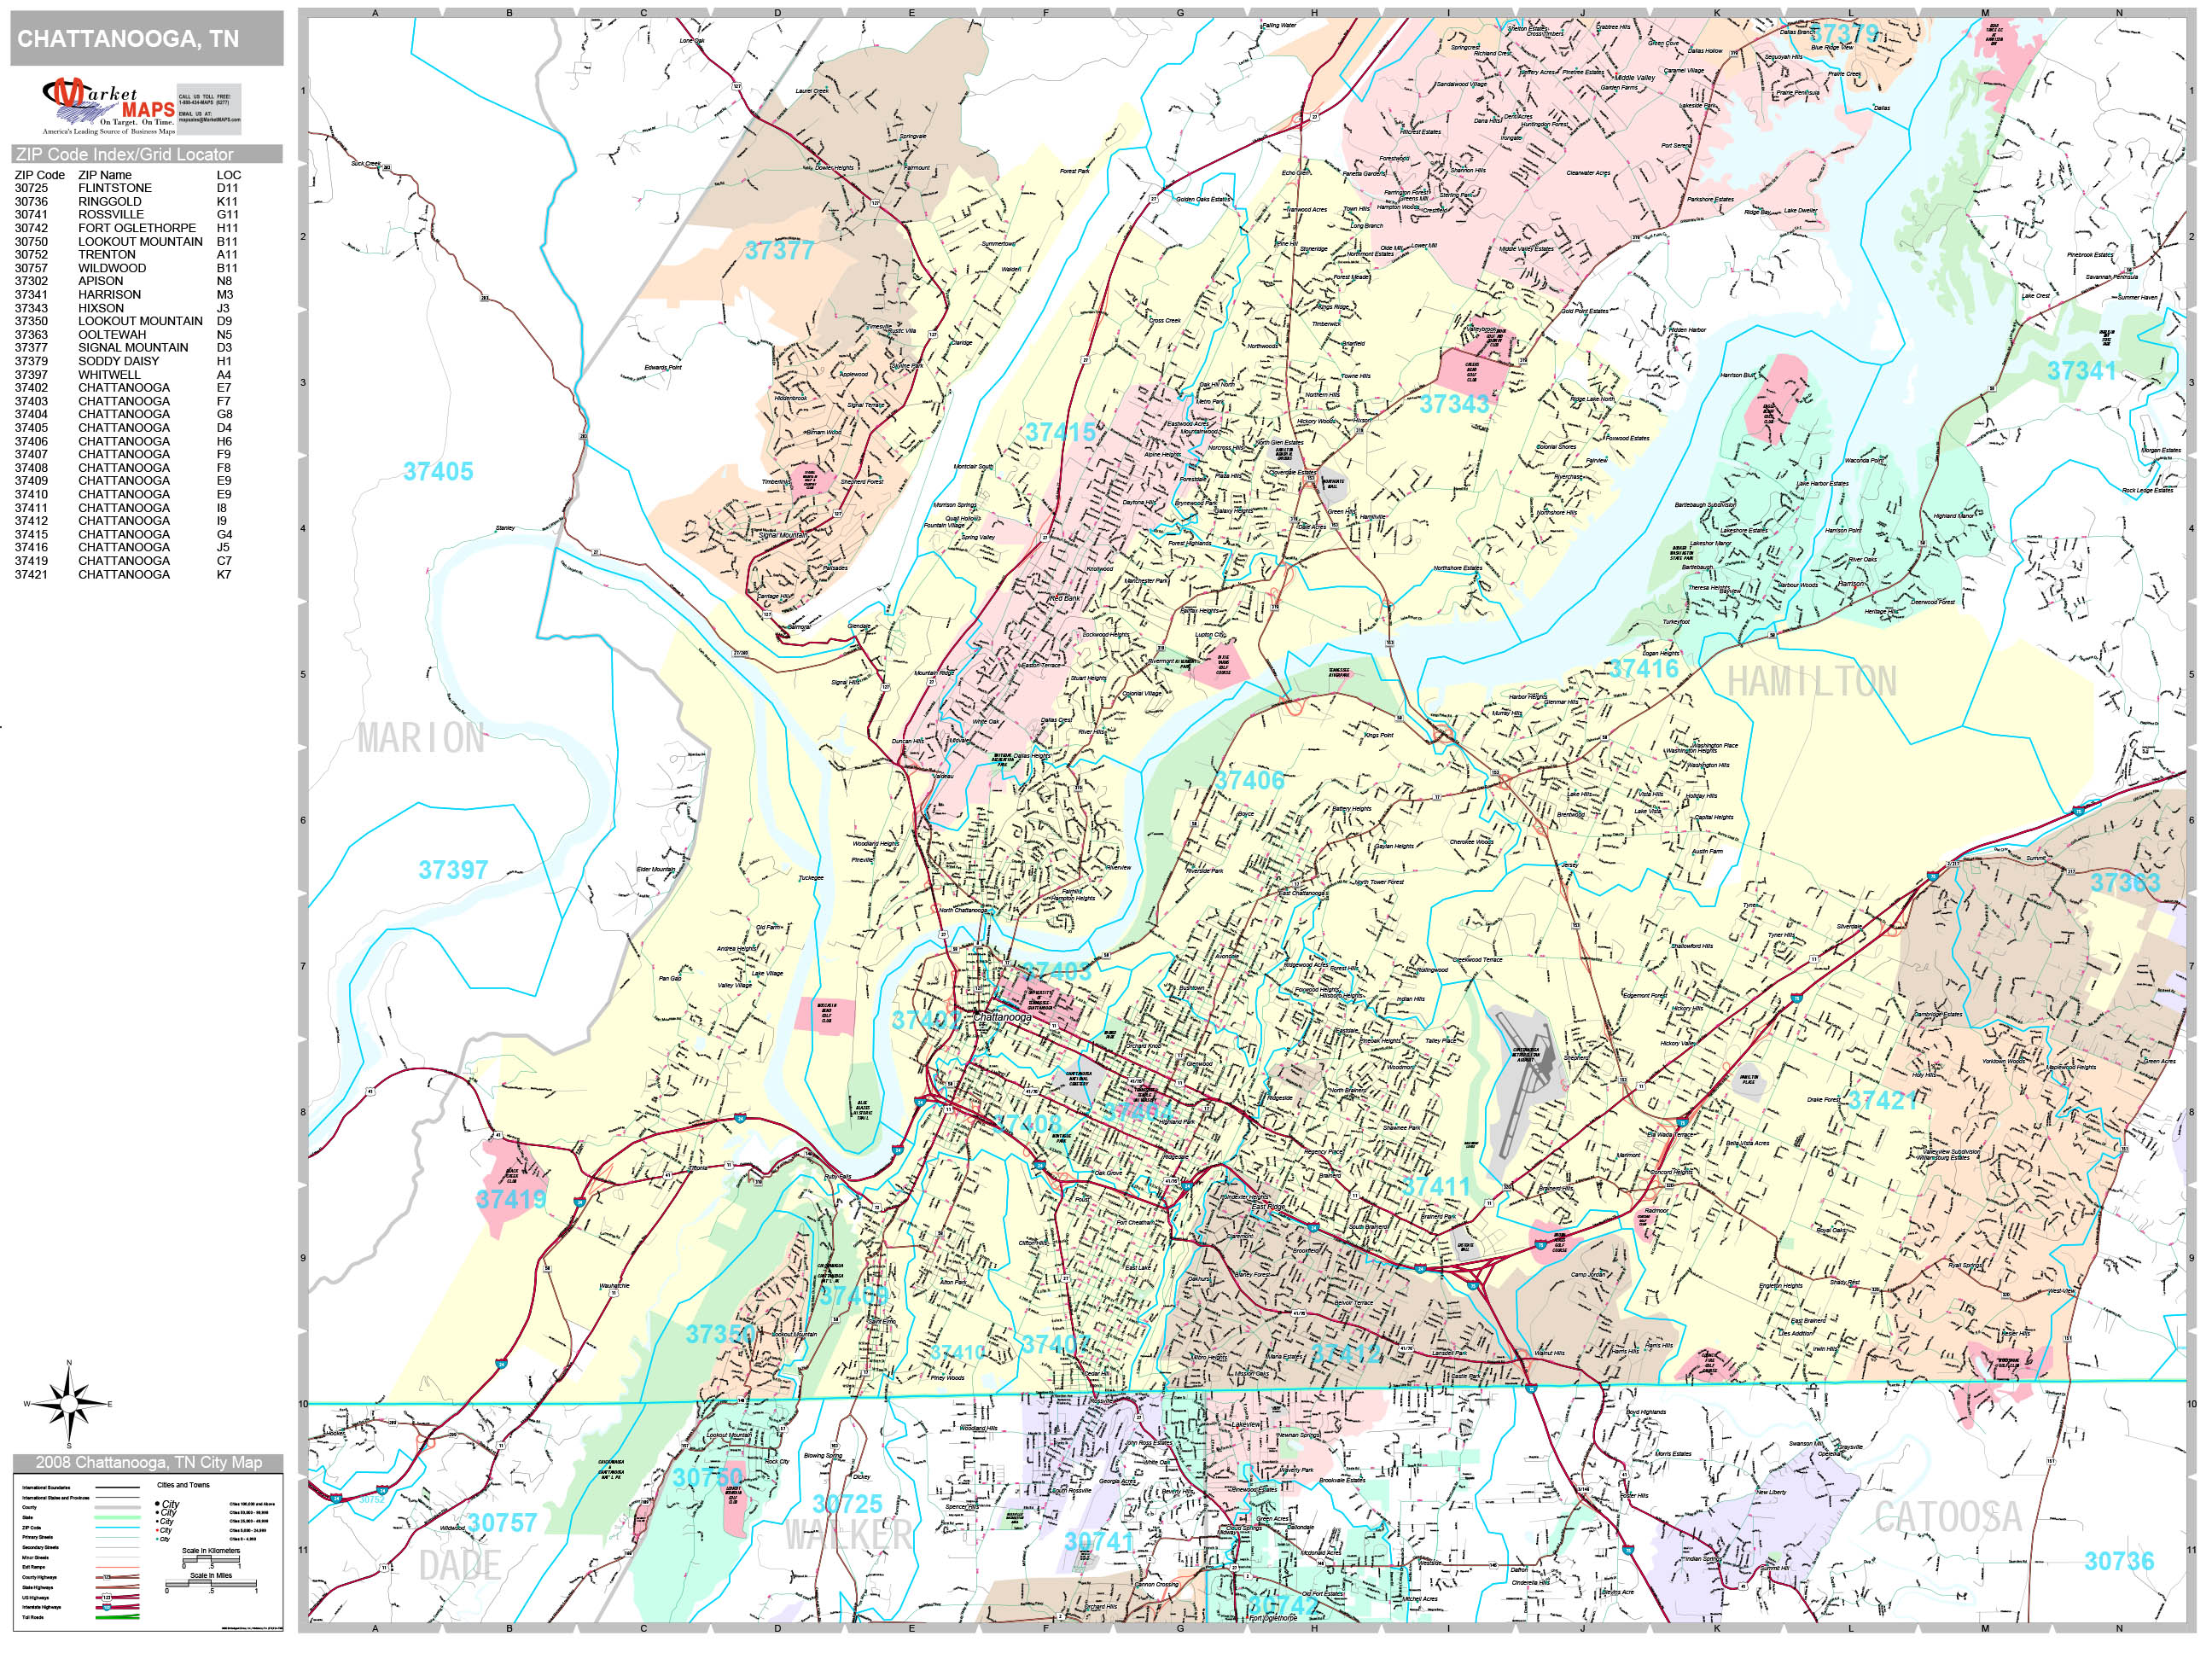 Chattanooga River Map